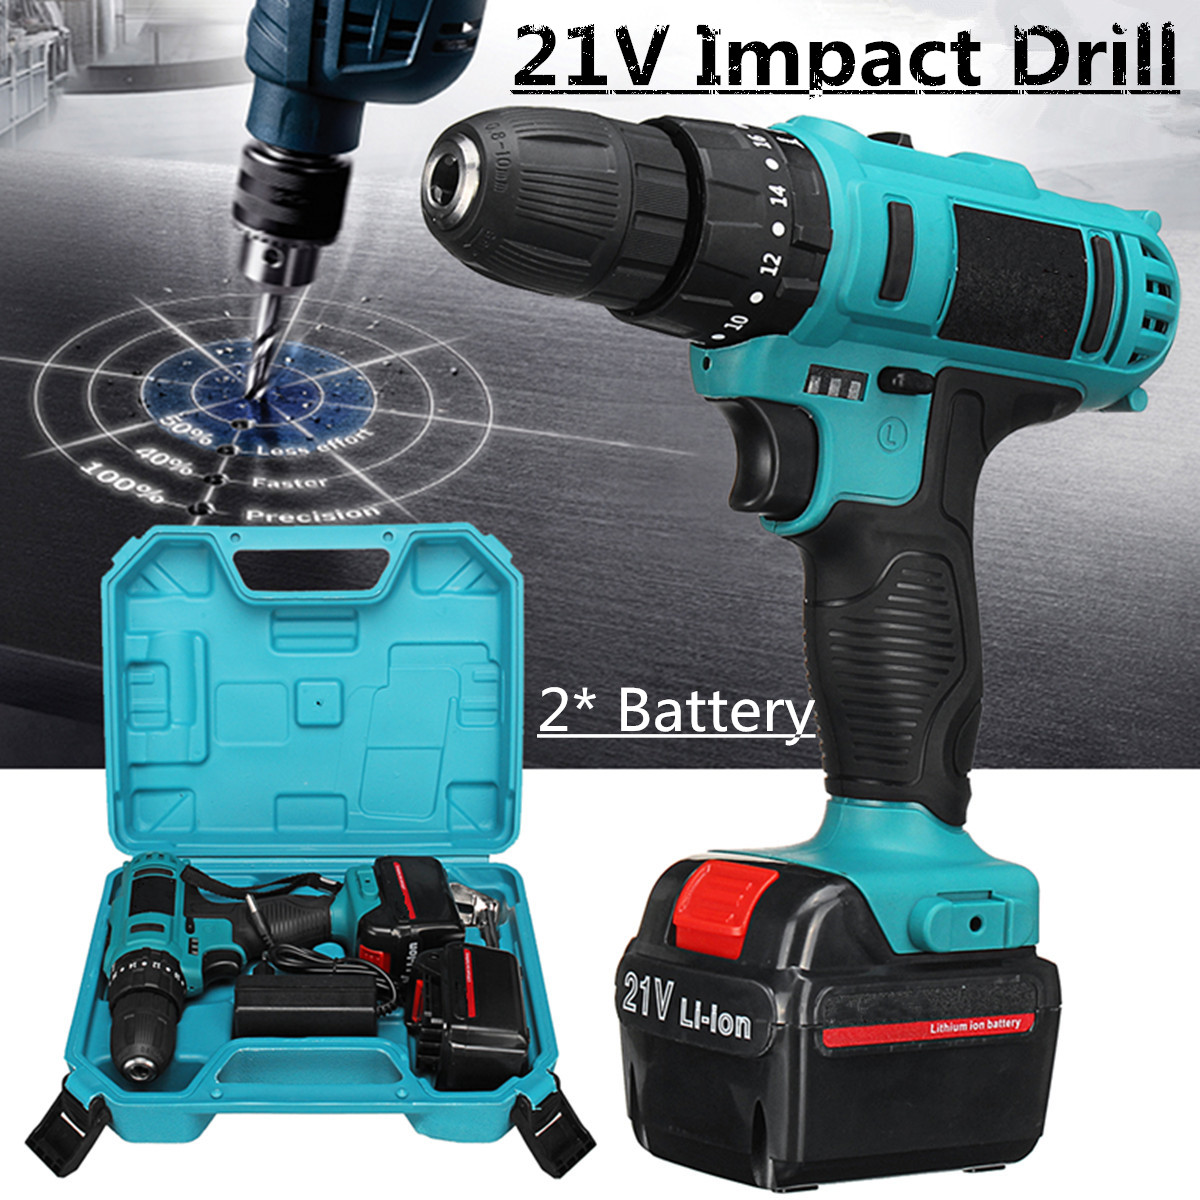 21V-Cordless-Impact-Power-Drill-Electric-Screwdriver-Set-with-2-Li-ion-Batteries-1372018-1